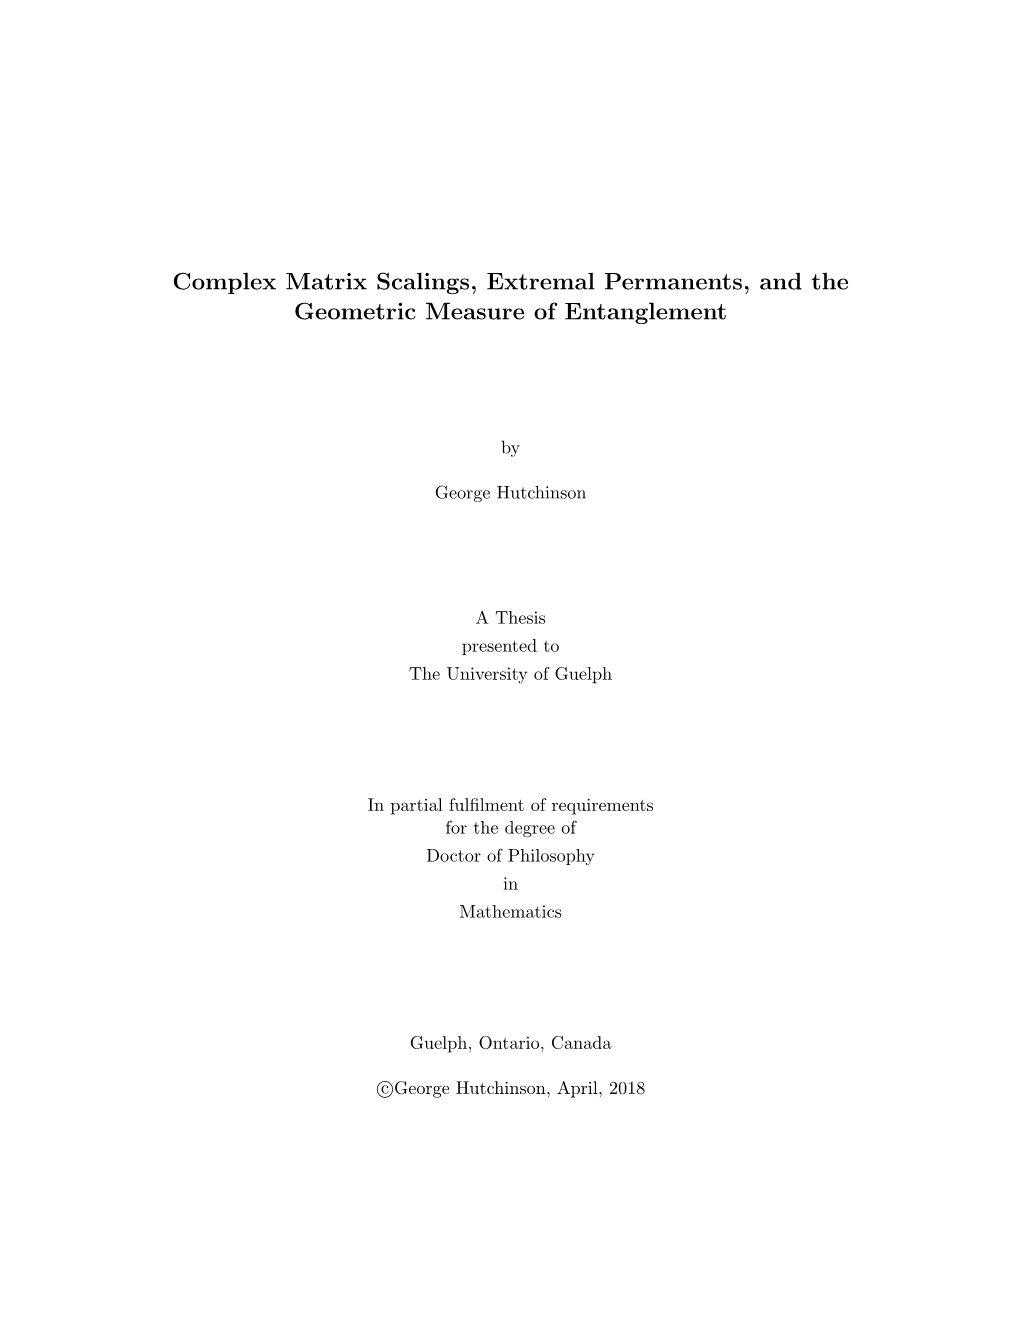 Complex Matrix Scalings, Extremal Permanents, and the Geometric Measure of Entanglement